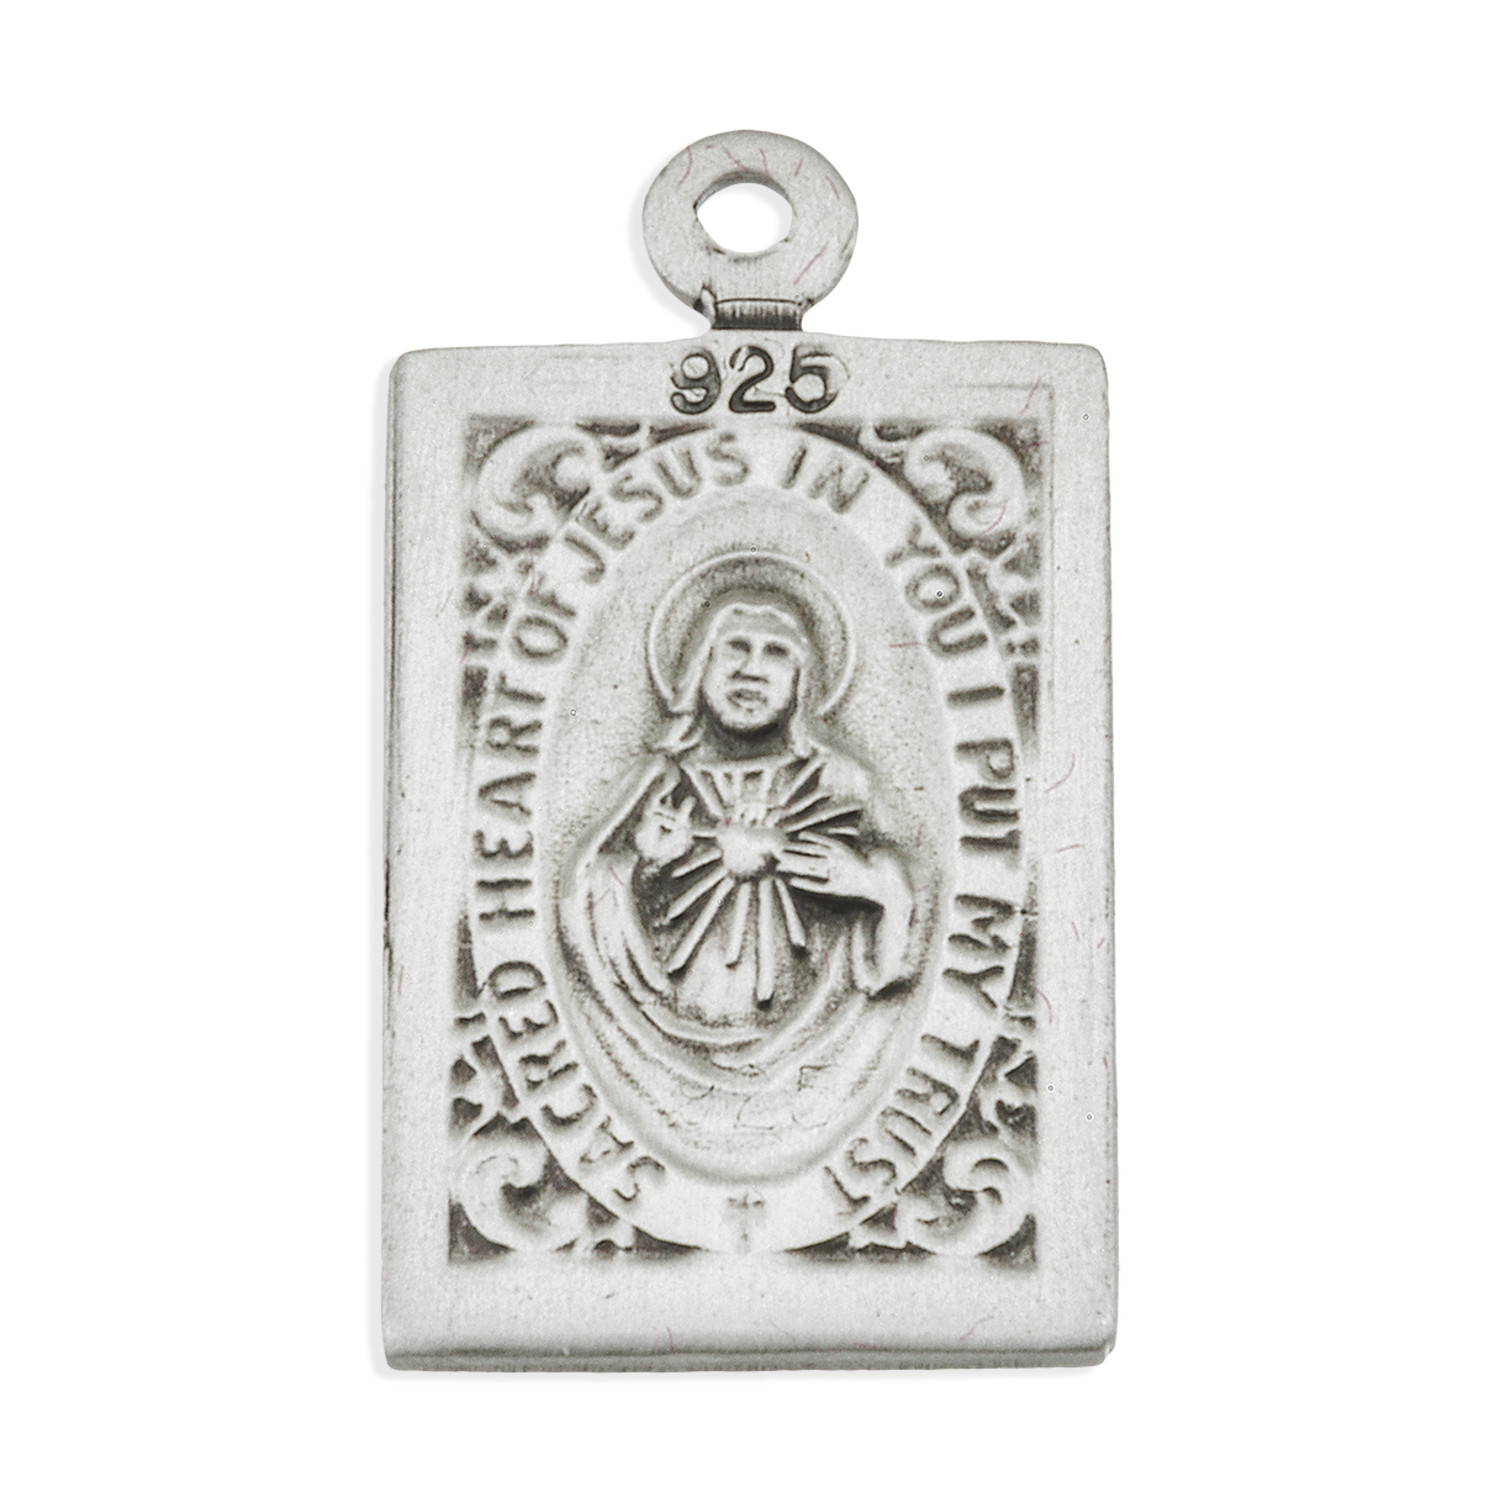 Sisters of Carmel: Our Lady of Czestochowa Medal Sterling Silver Polish Back